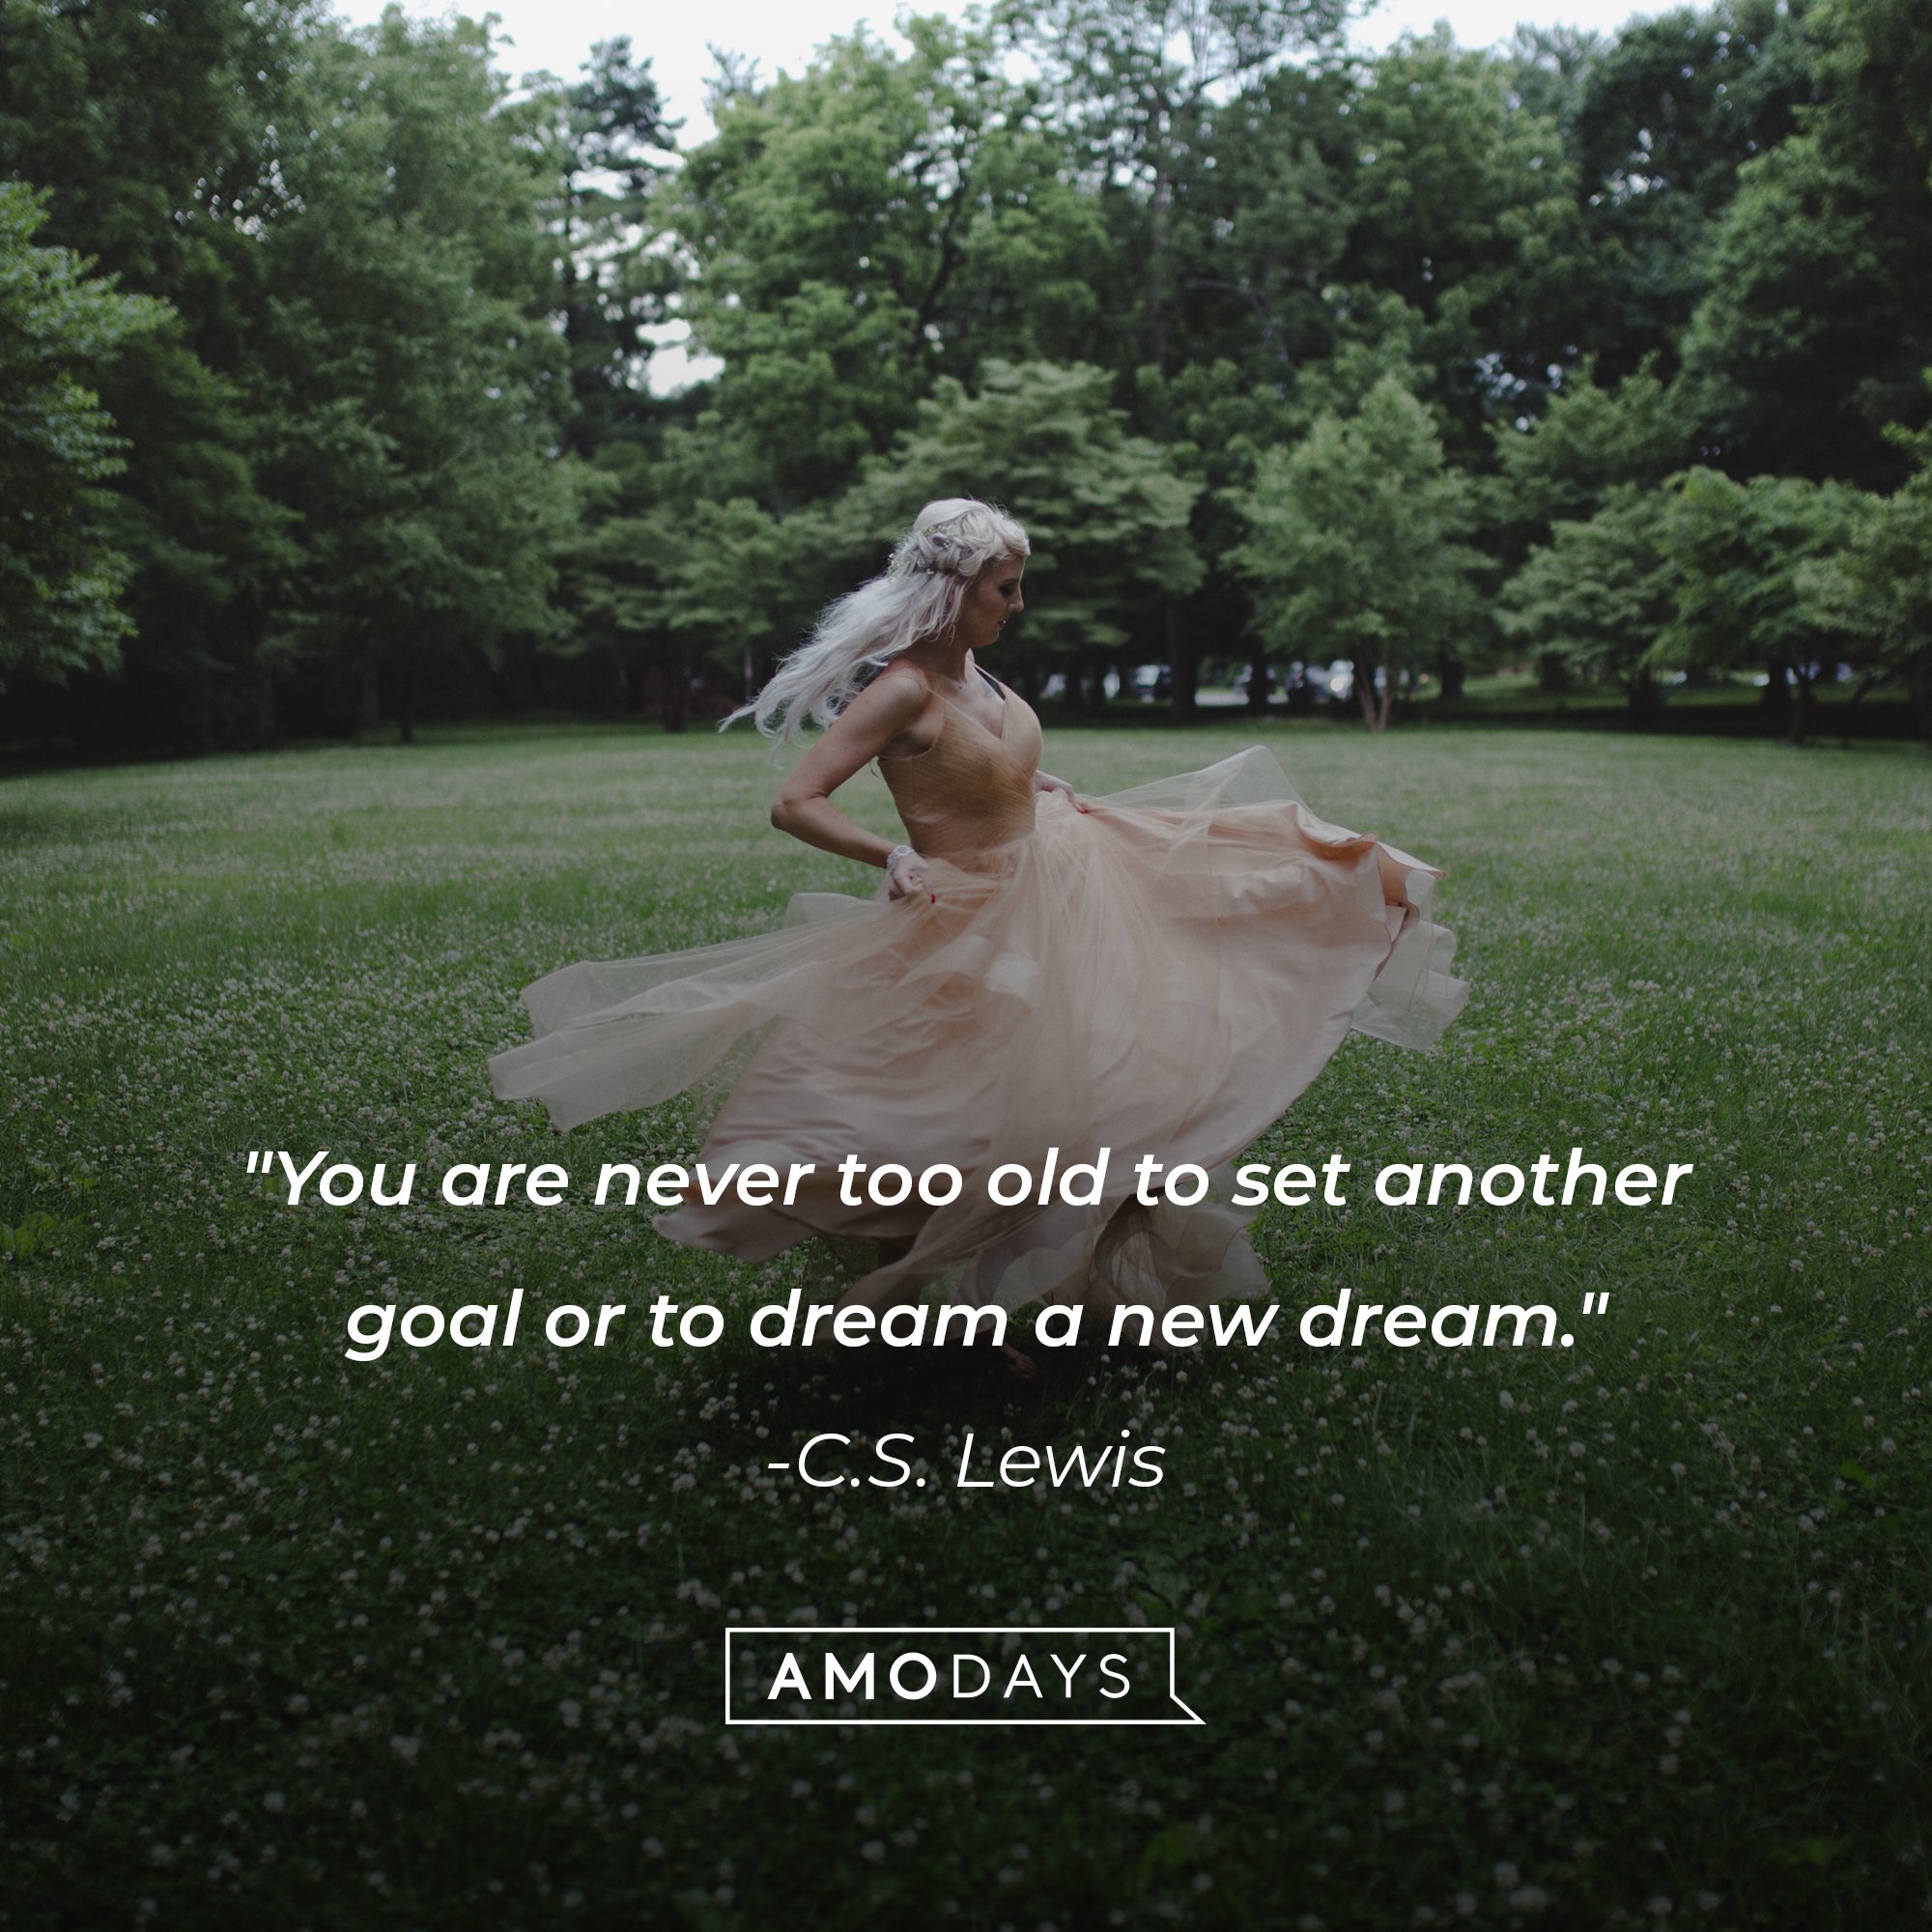 C.S. Lewis' quote: "You are never too old to set another goal or to dream a new dream." | Image: Amo Days